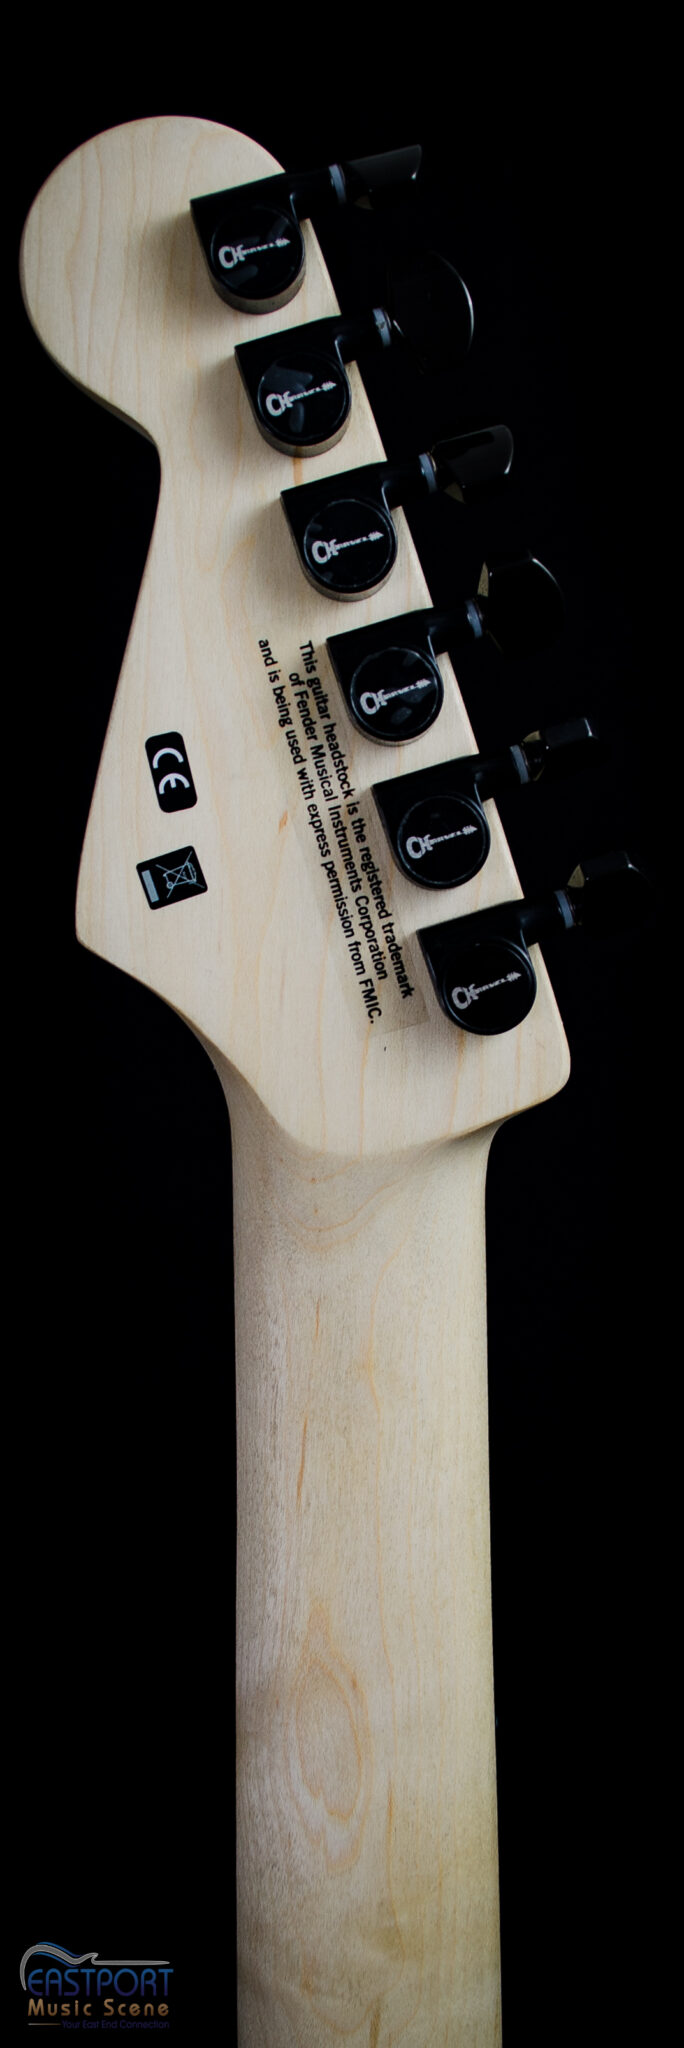 A close up of the controls on an electric guitar